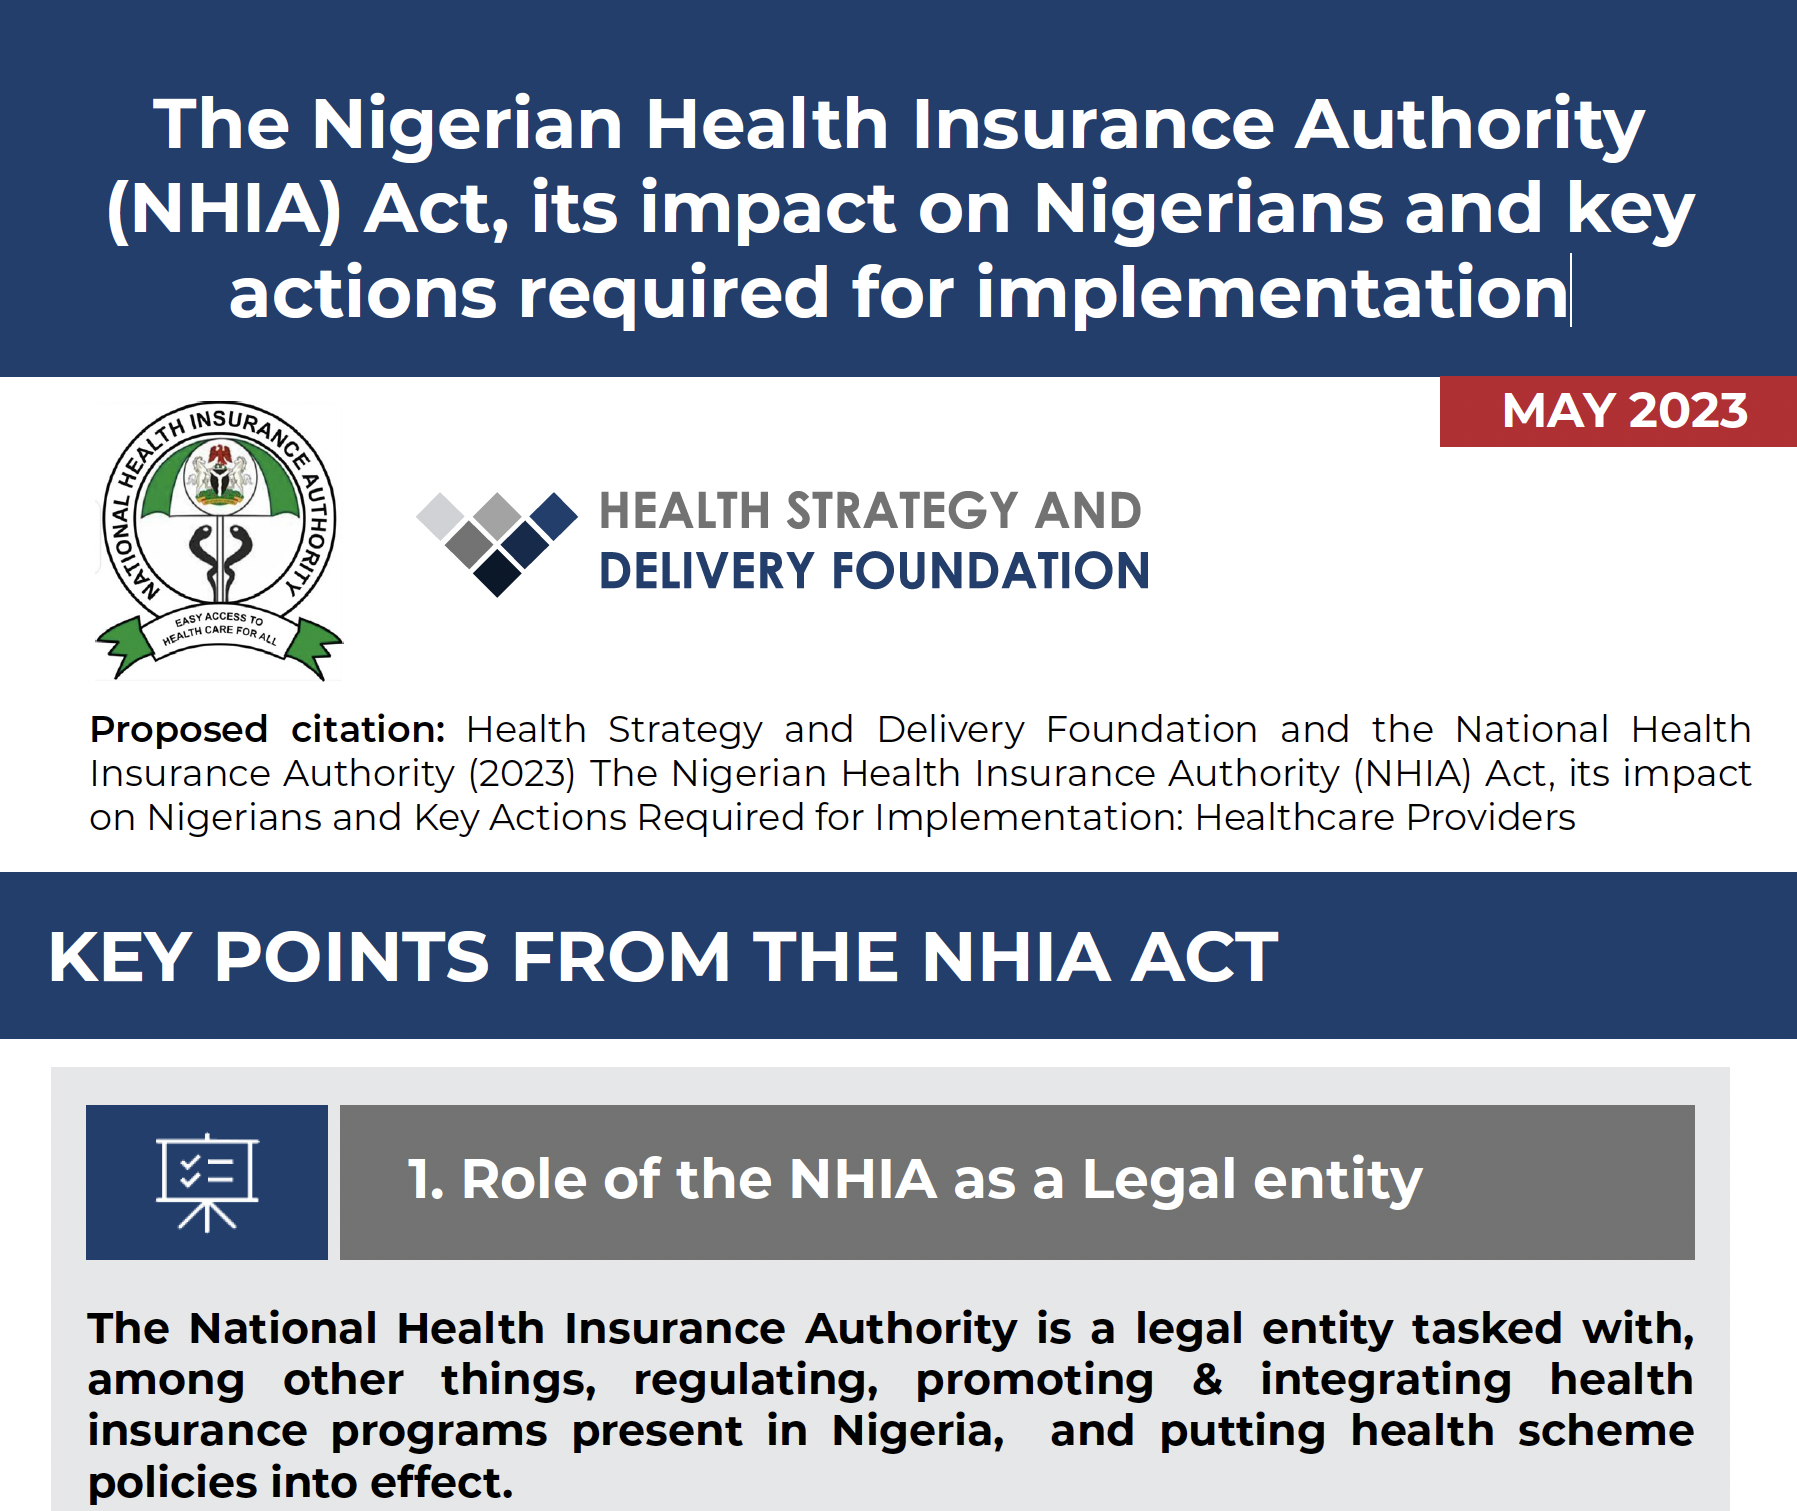 The Nigerian Health Insurance Authority Act: Required actions for Implementation for healthcare providers